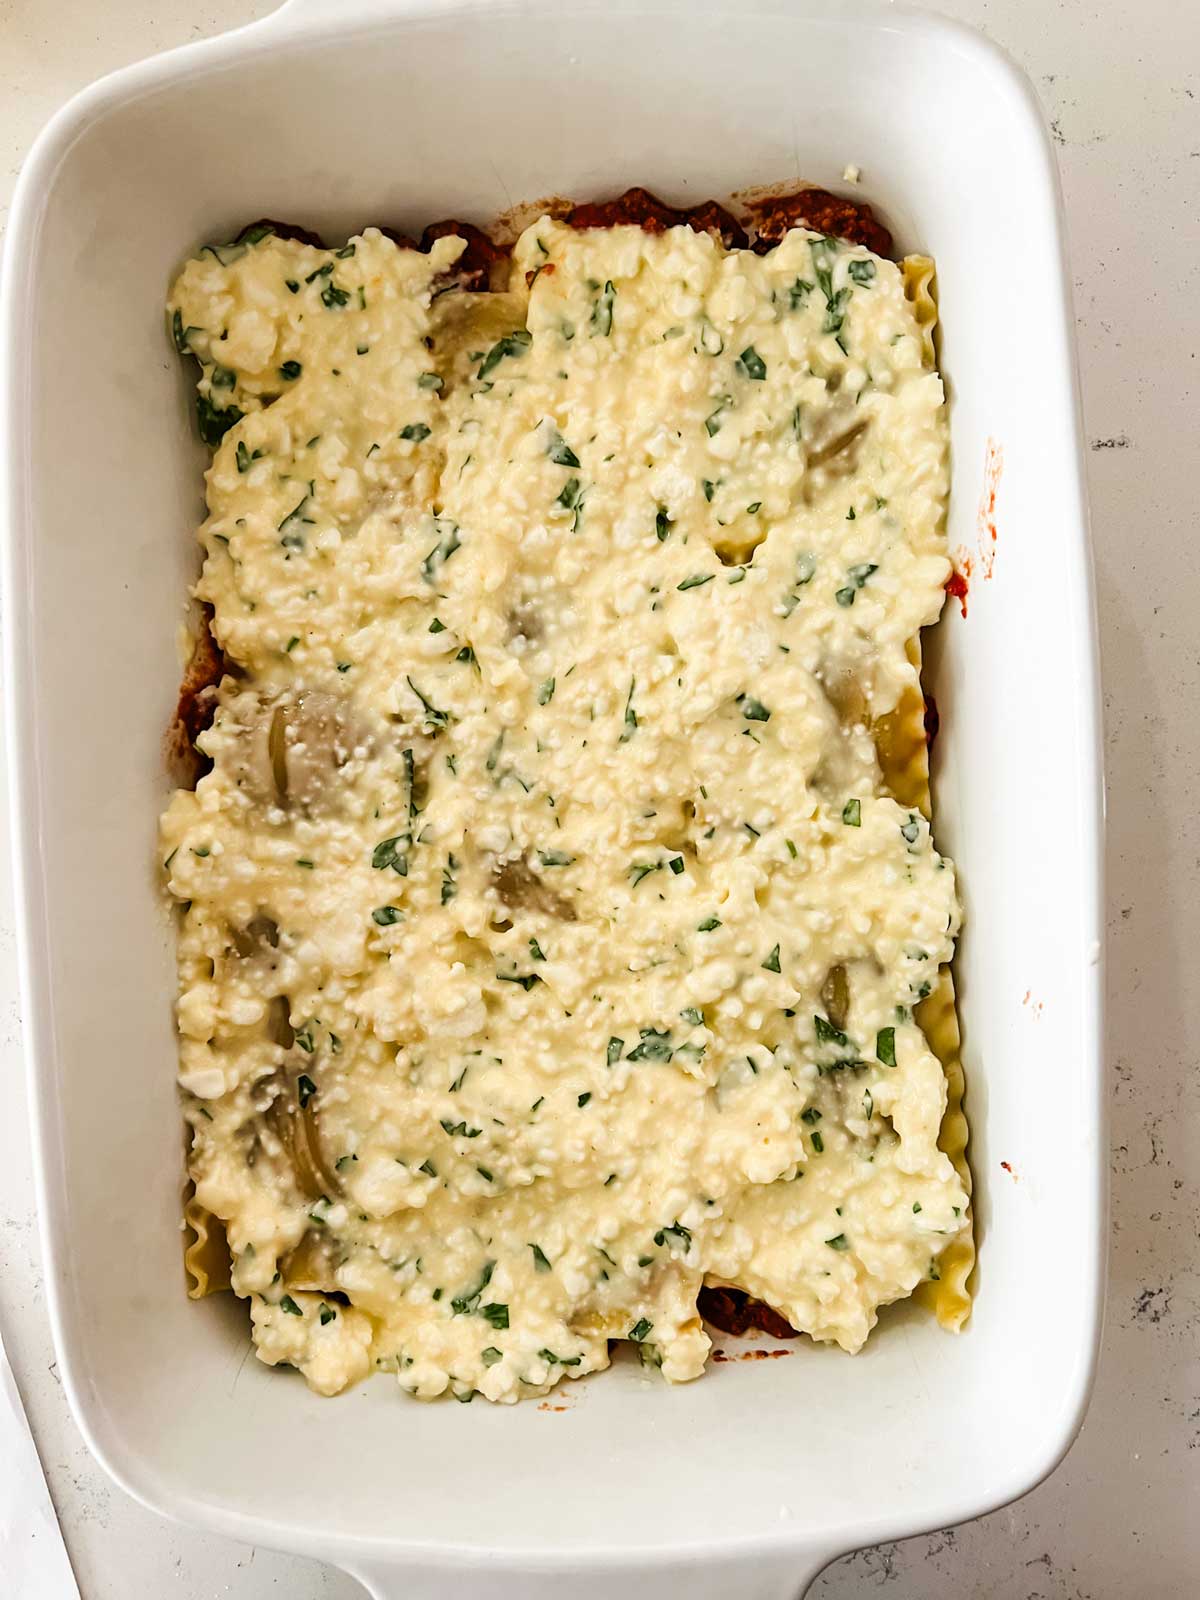 Cottage cheese over lasagna noodles in a casserole dish.